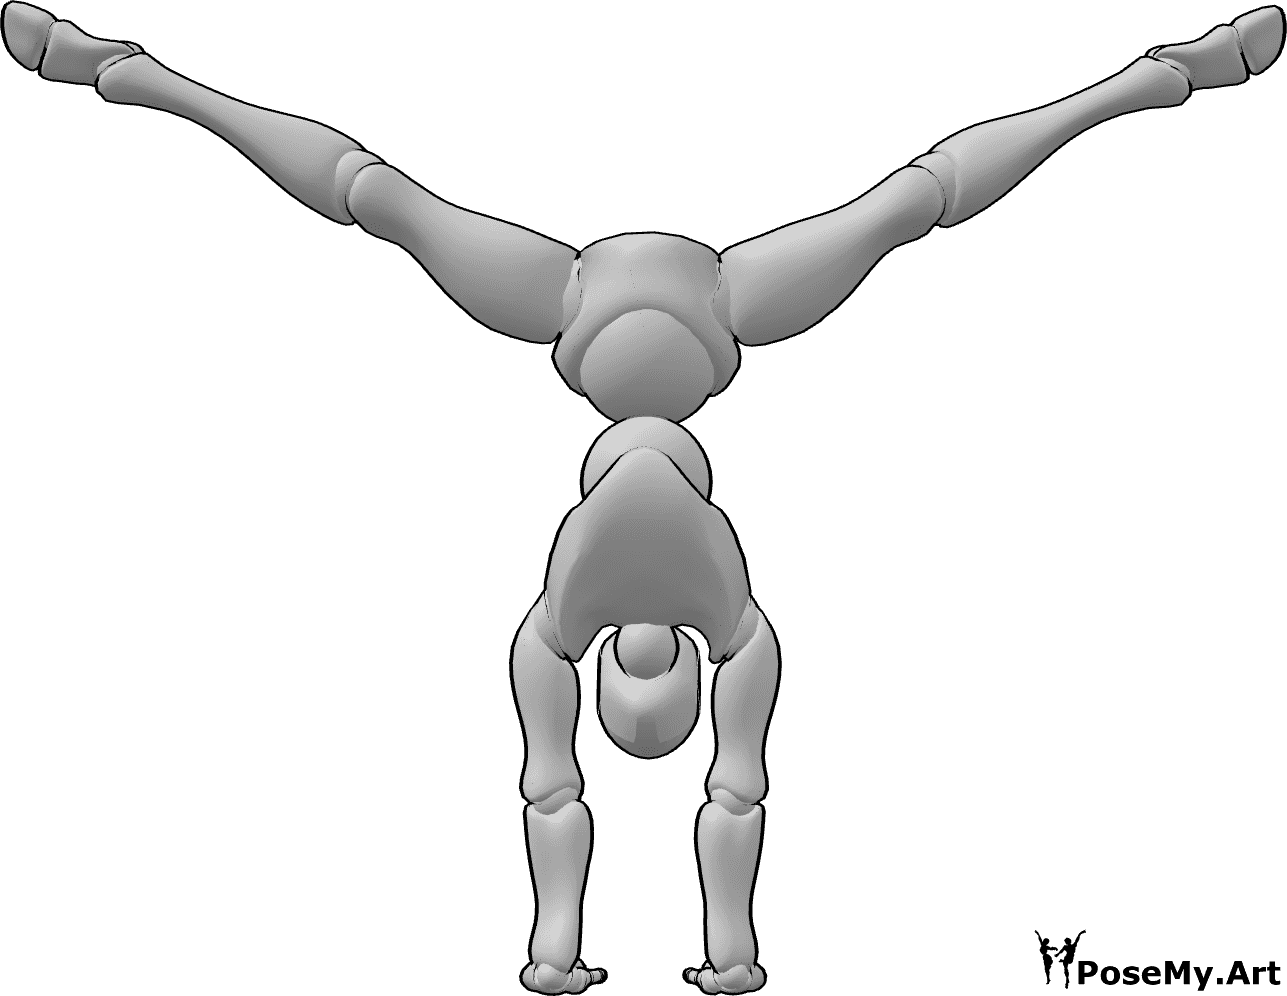 Pose Reference- Handstand side split pose - Female is standing on her hands and doing a side split